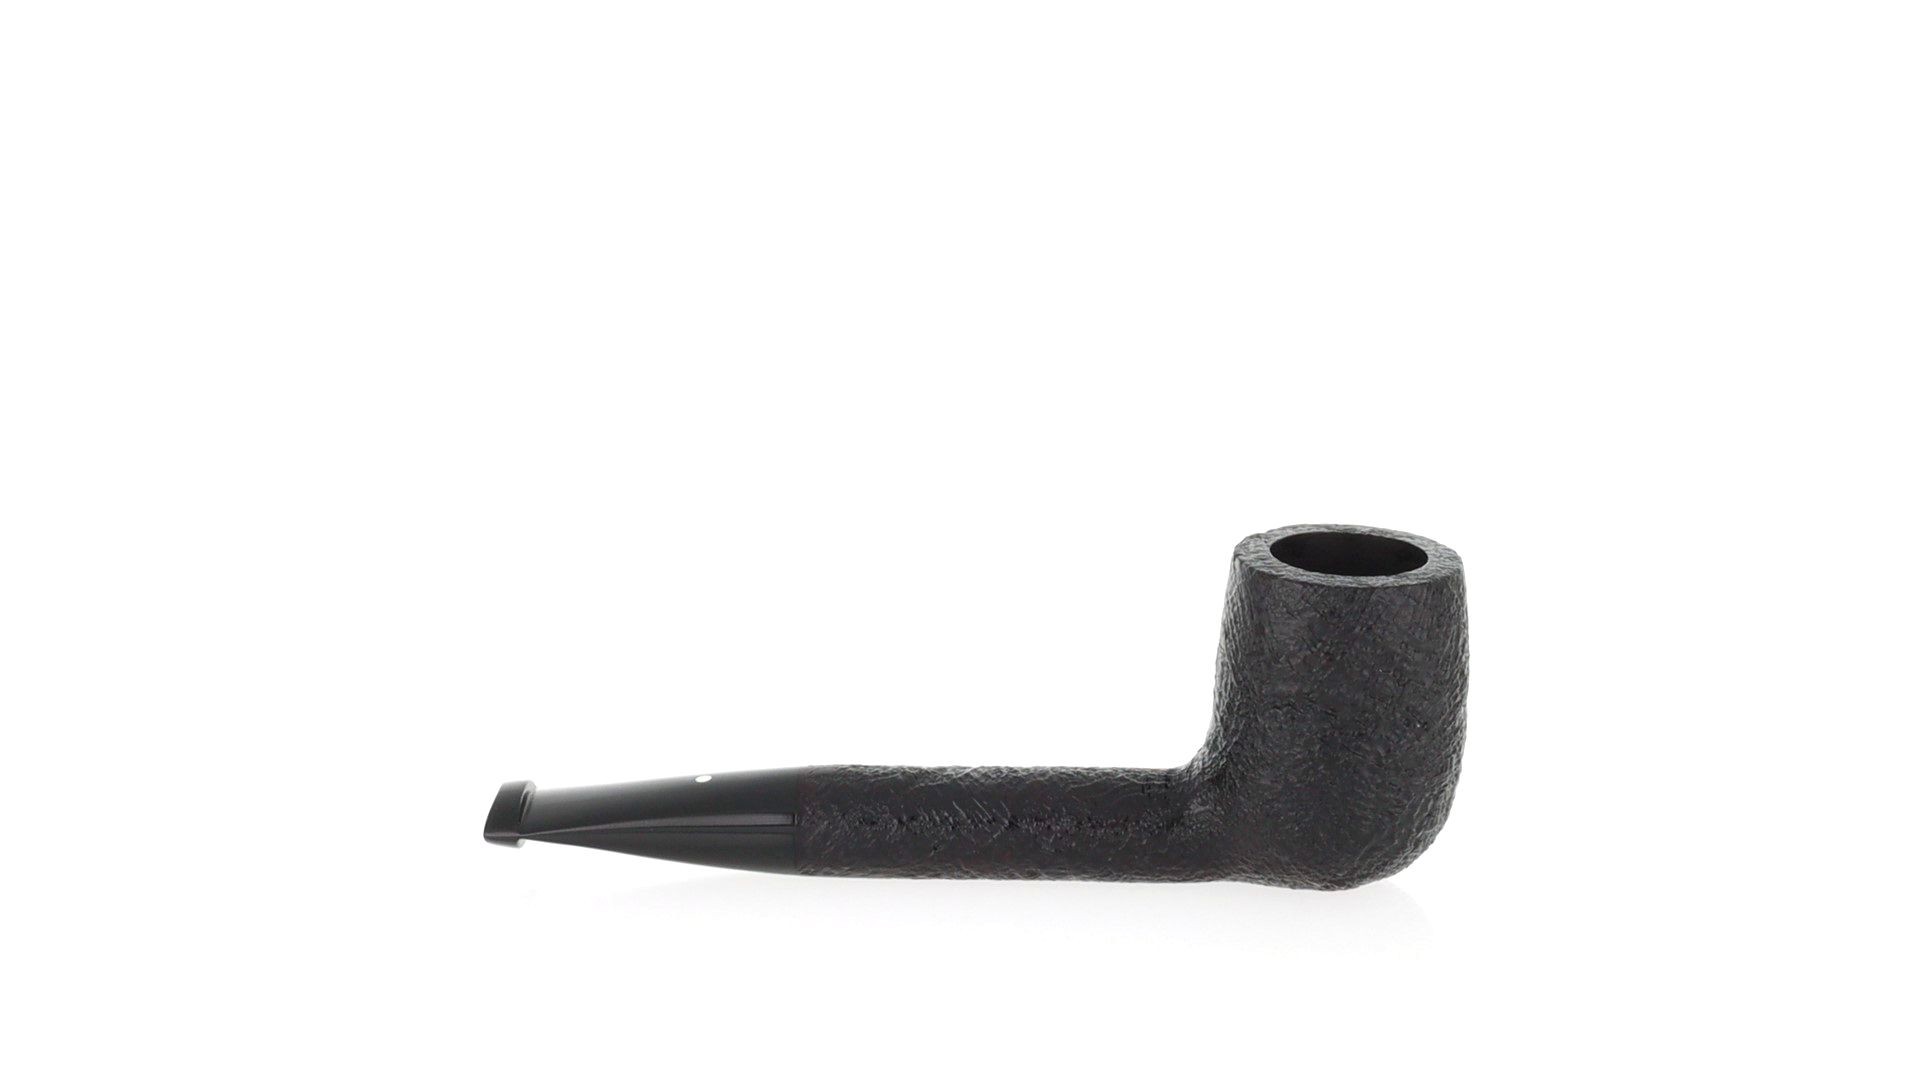 Pipe Dunhill Shell briar group 3 shape Liverpool